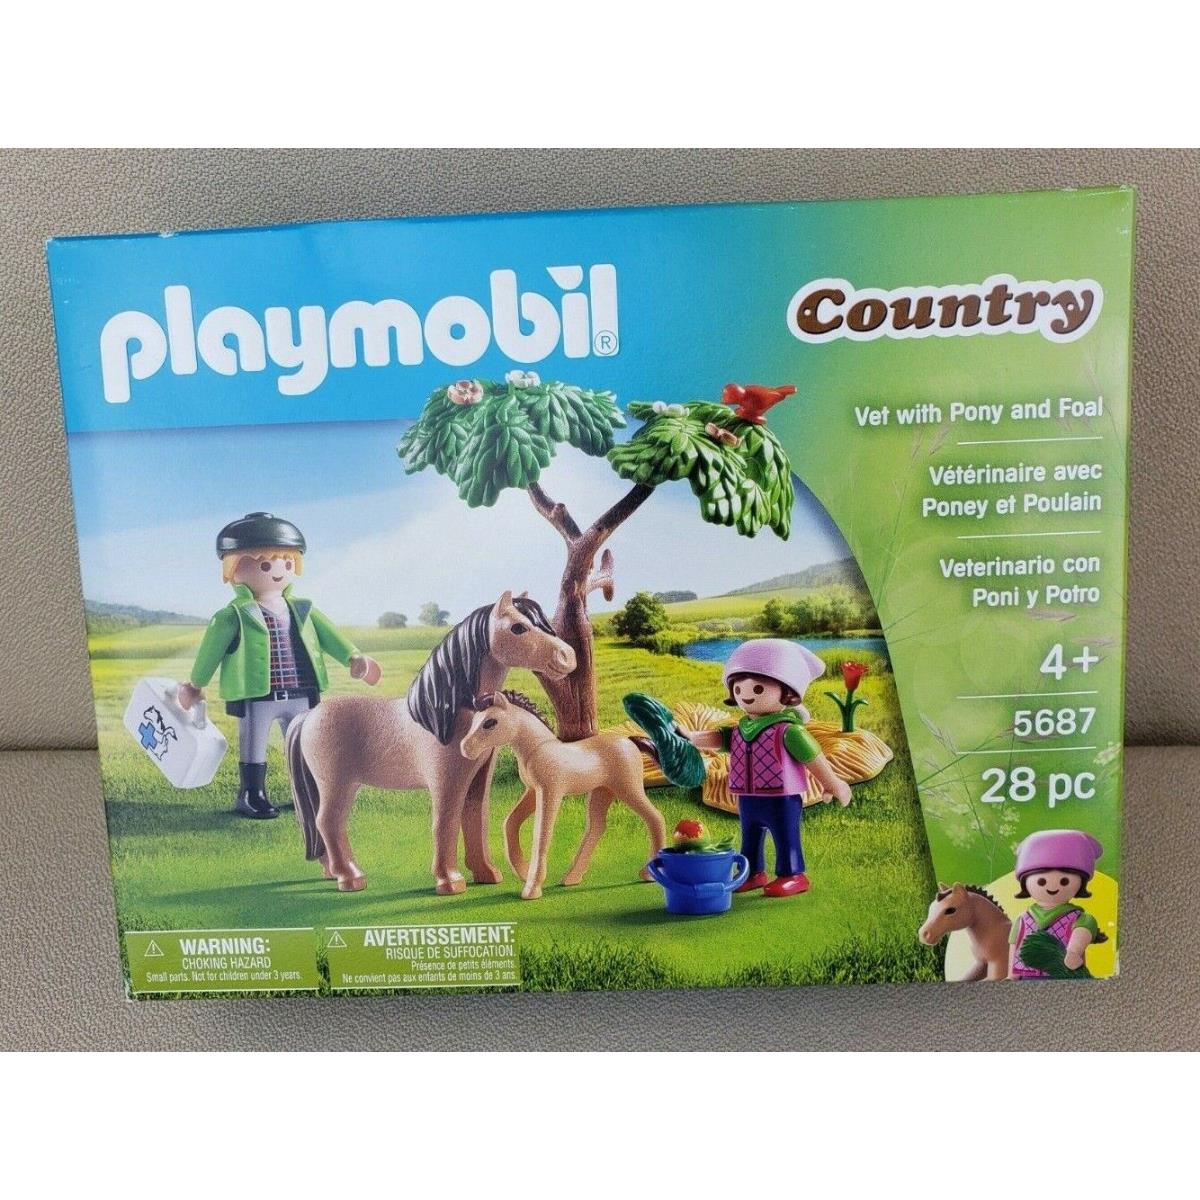 Playmobil Country Vet with Pony and Foal 5687 Horse Pkgdstrs